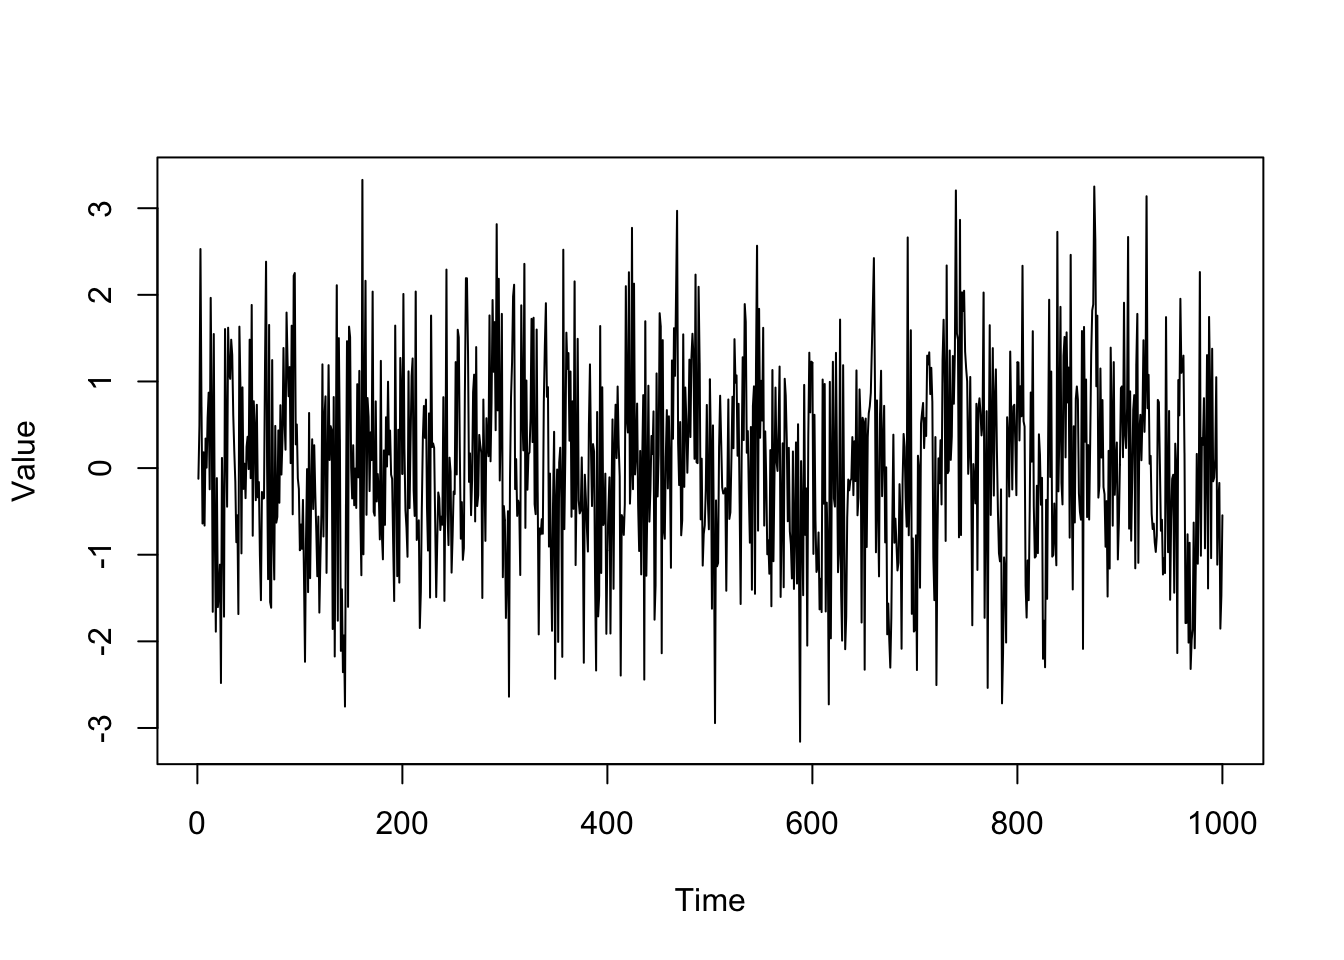 A plot of our data generating process; x-axis is time and y-axis is the values produced.